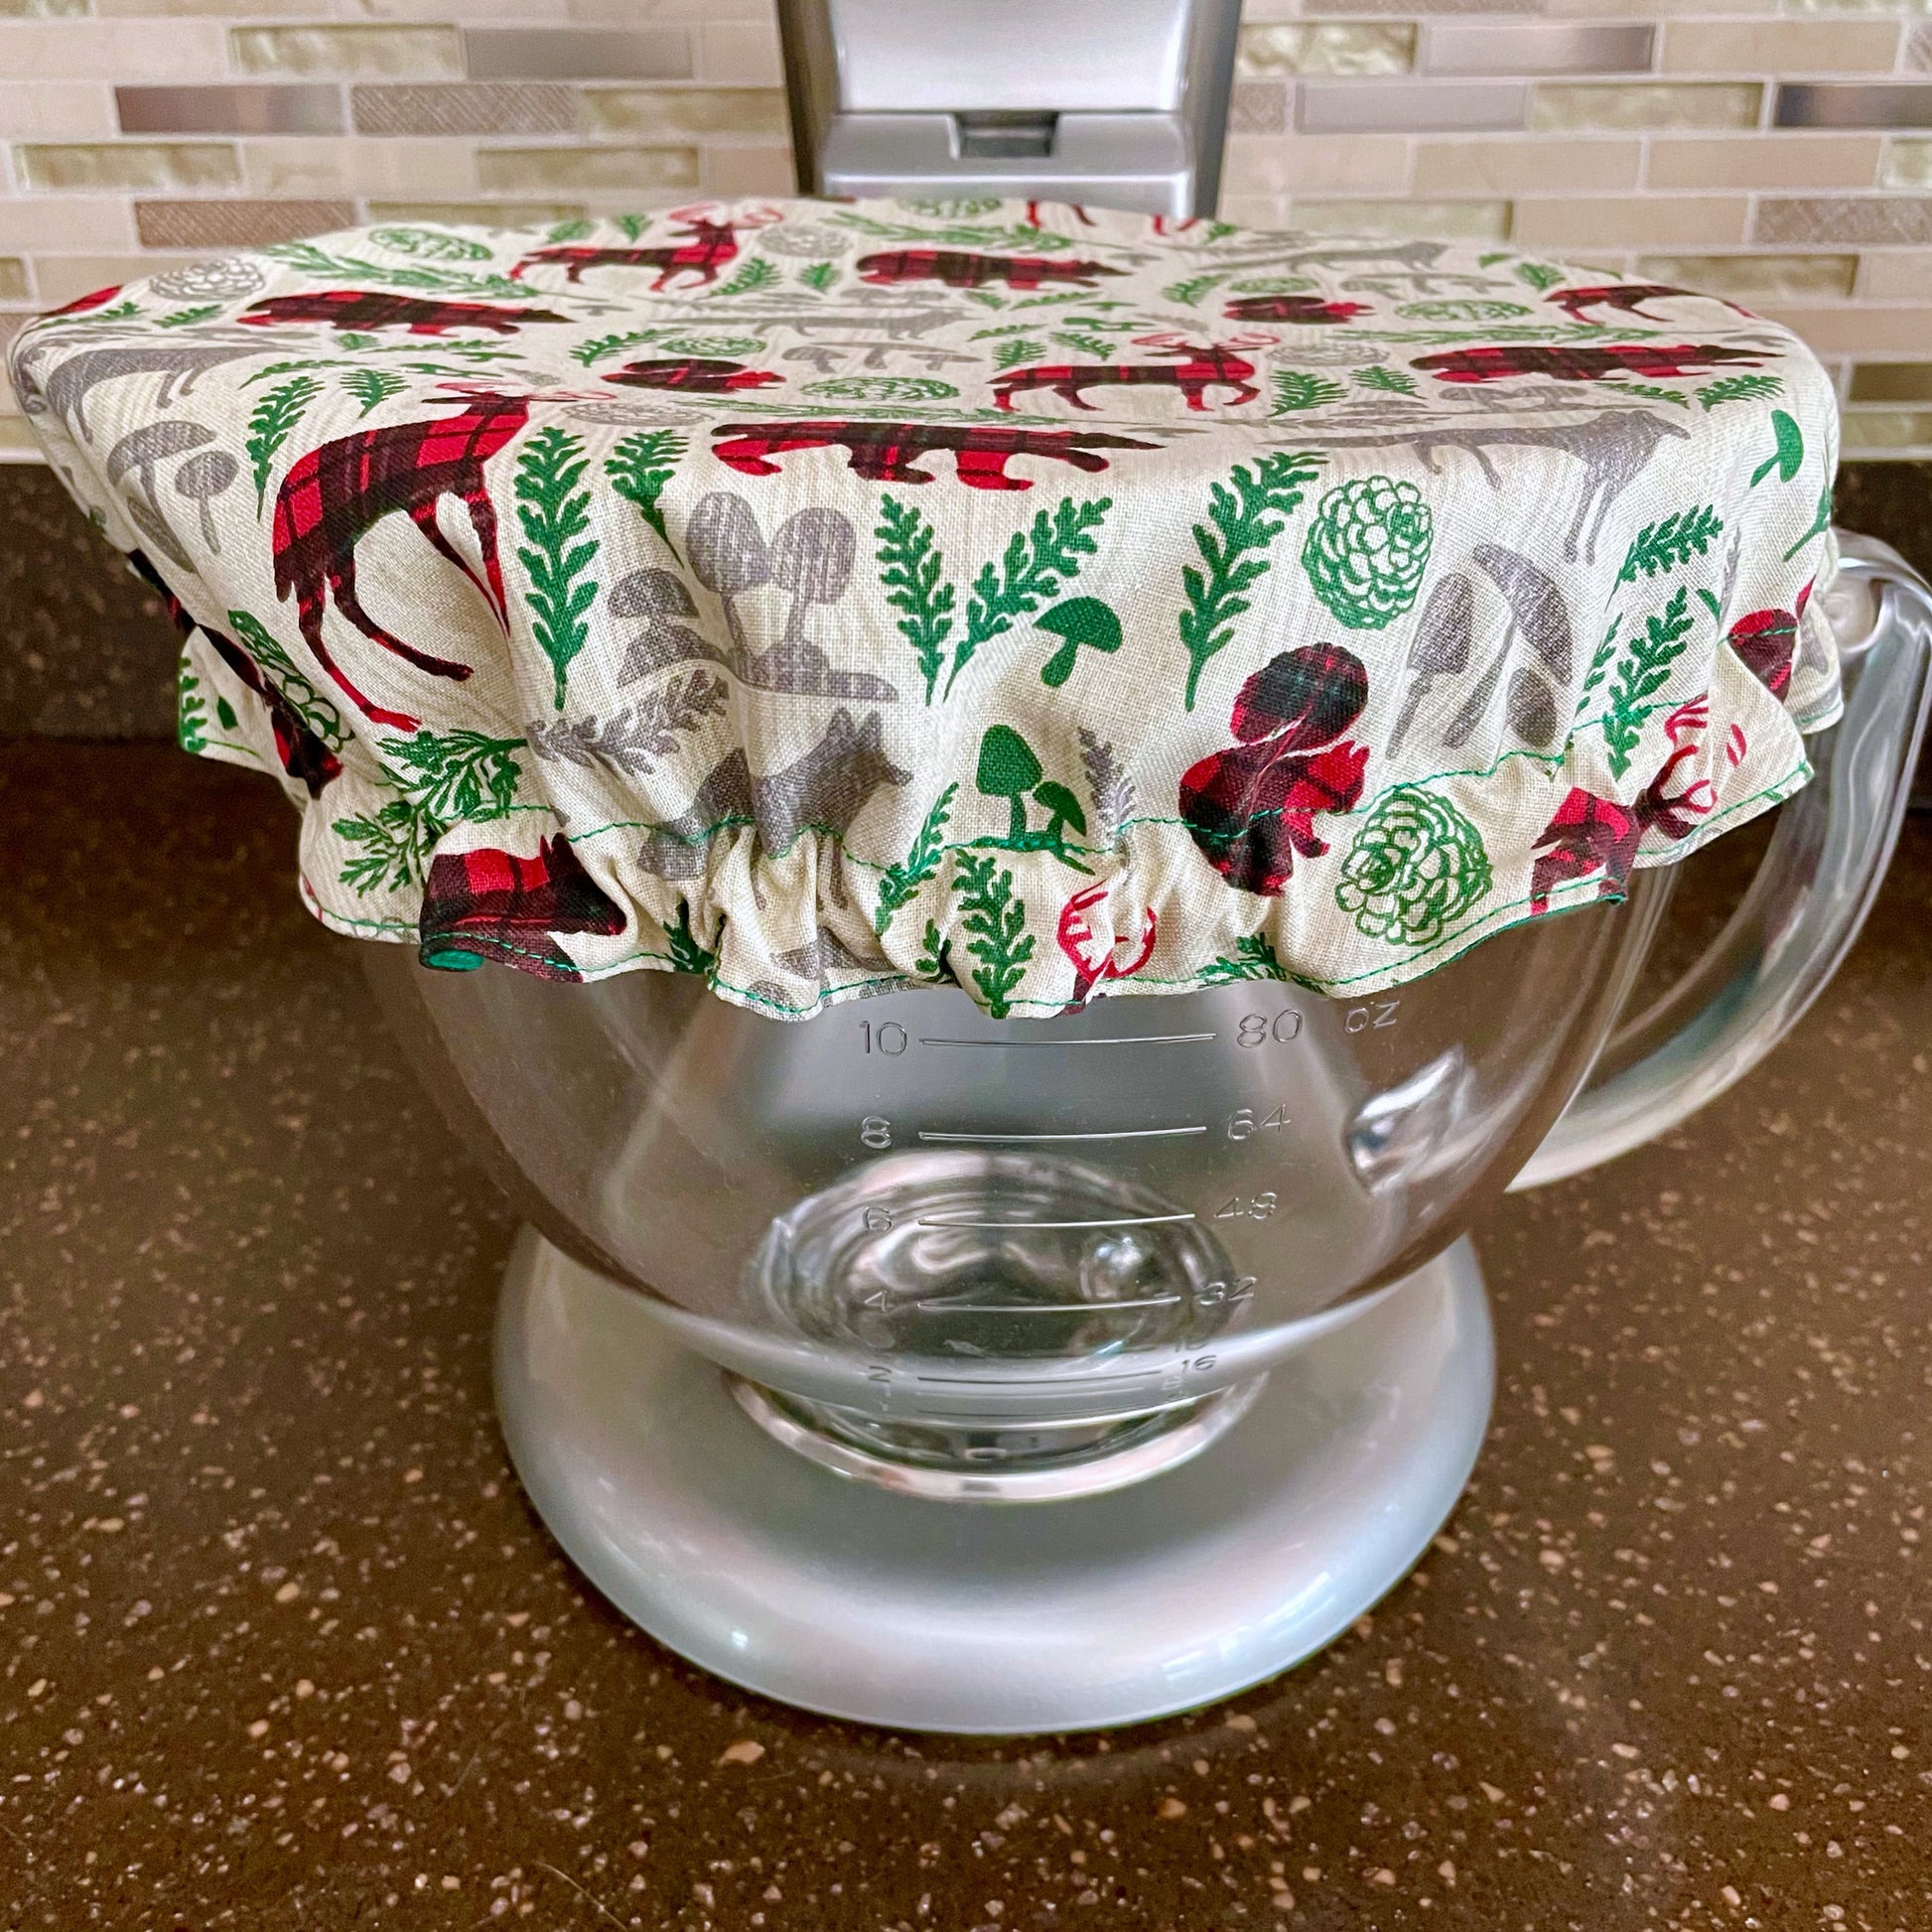 Stand Mixer Bowl Covers - Gingerbread Cats – Dalisay Design Fabrics